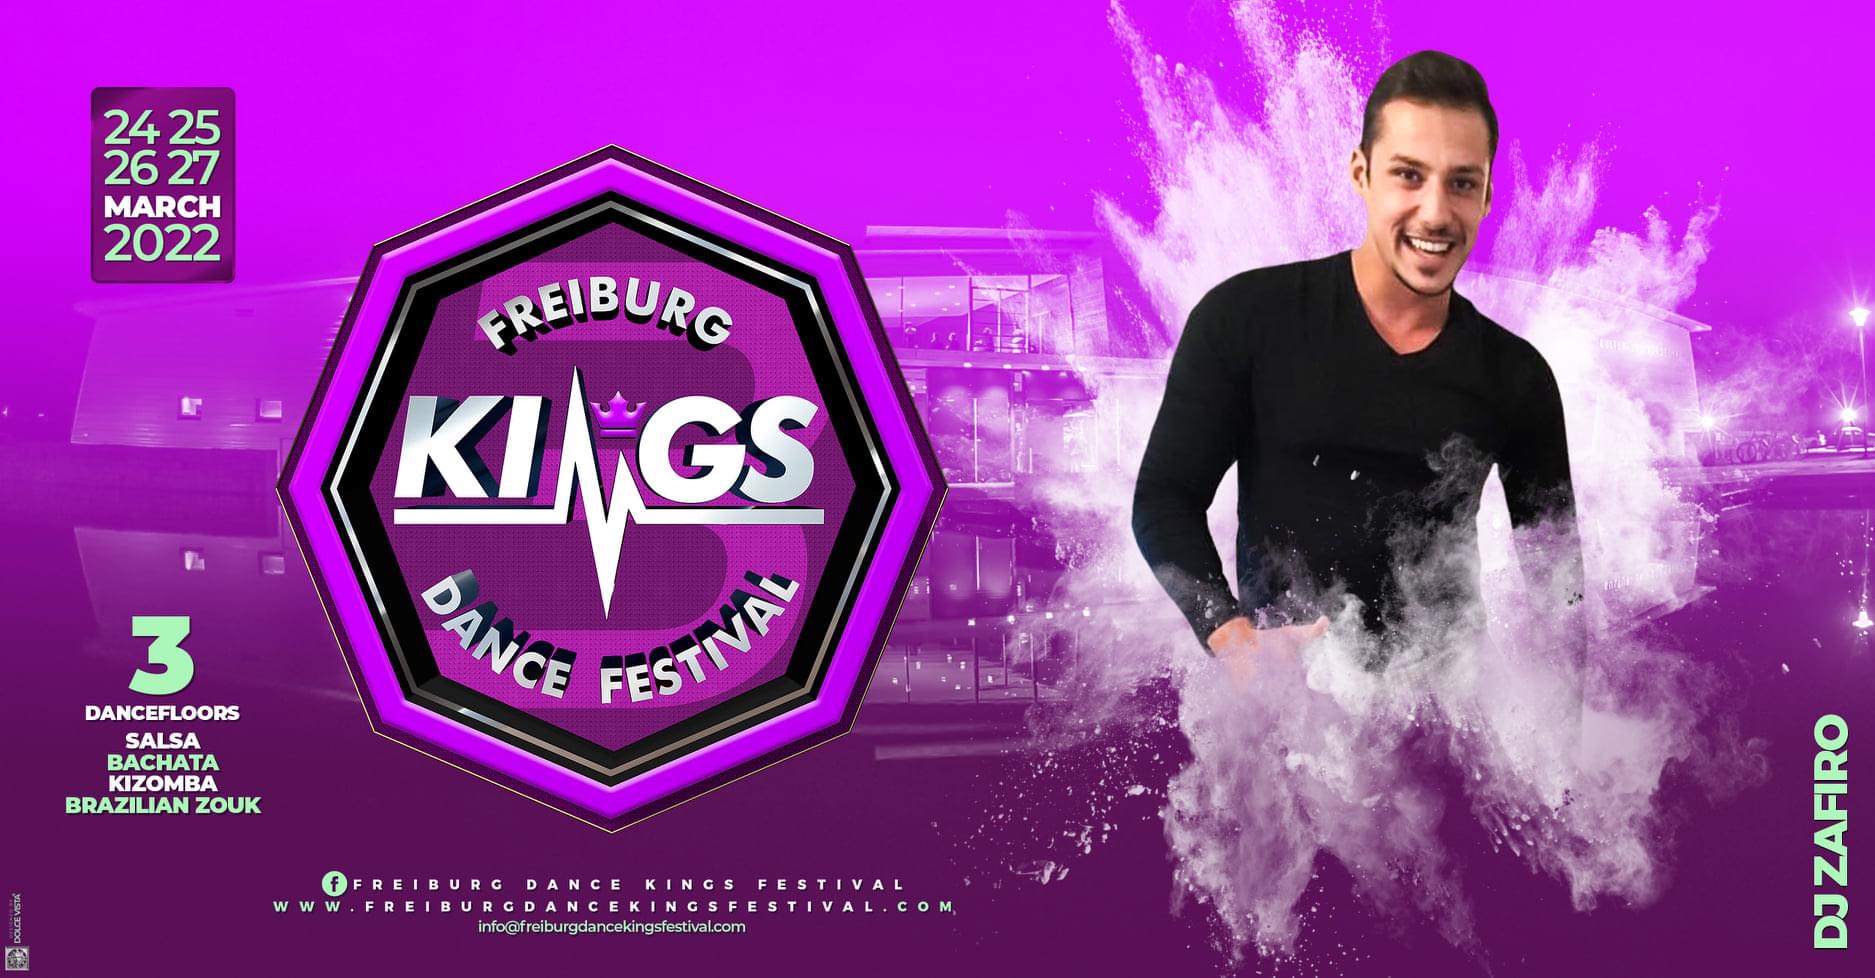 You are currently viewing Freiburg Dance Kings Festival 2022